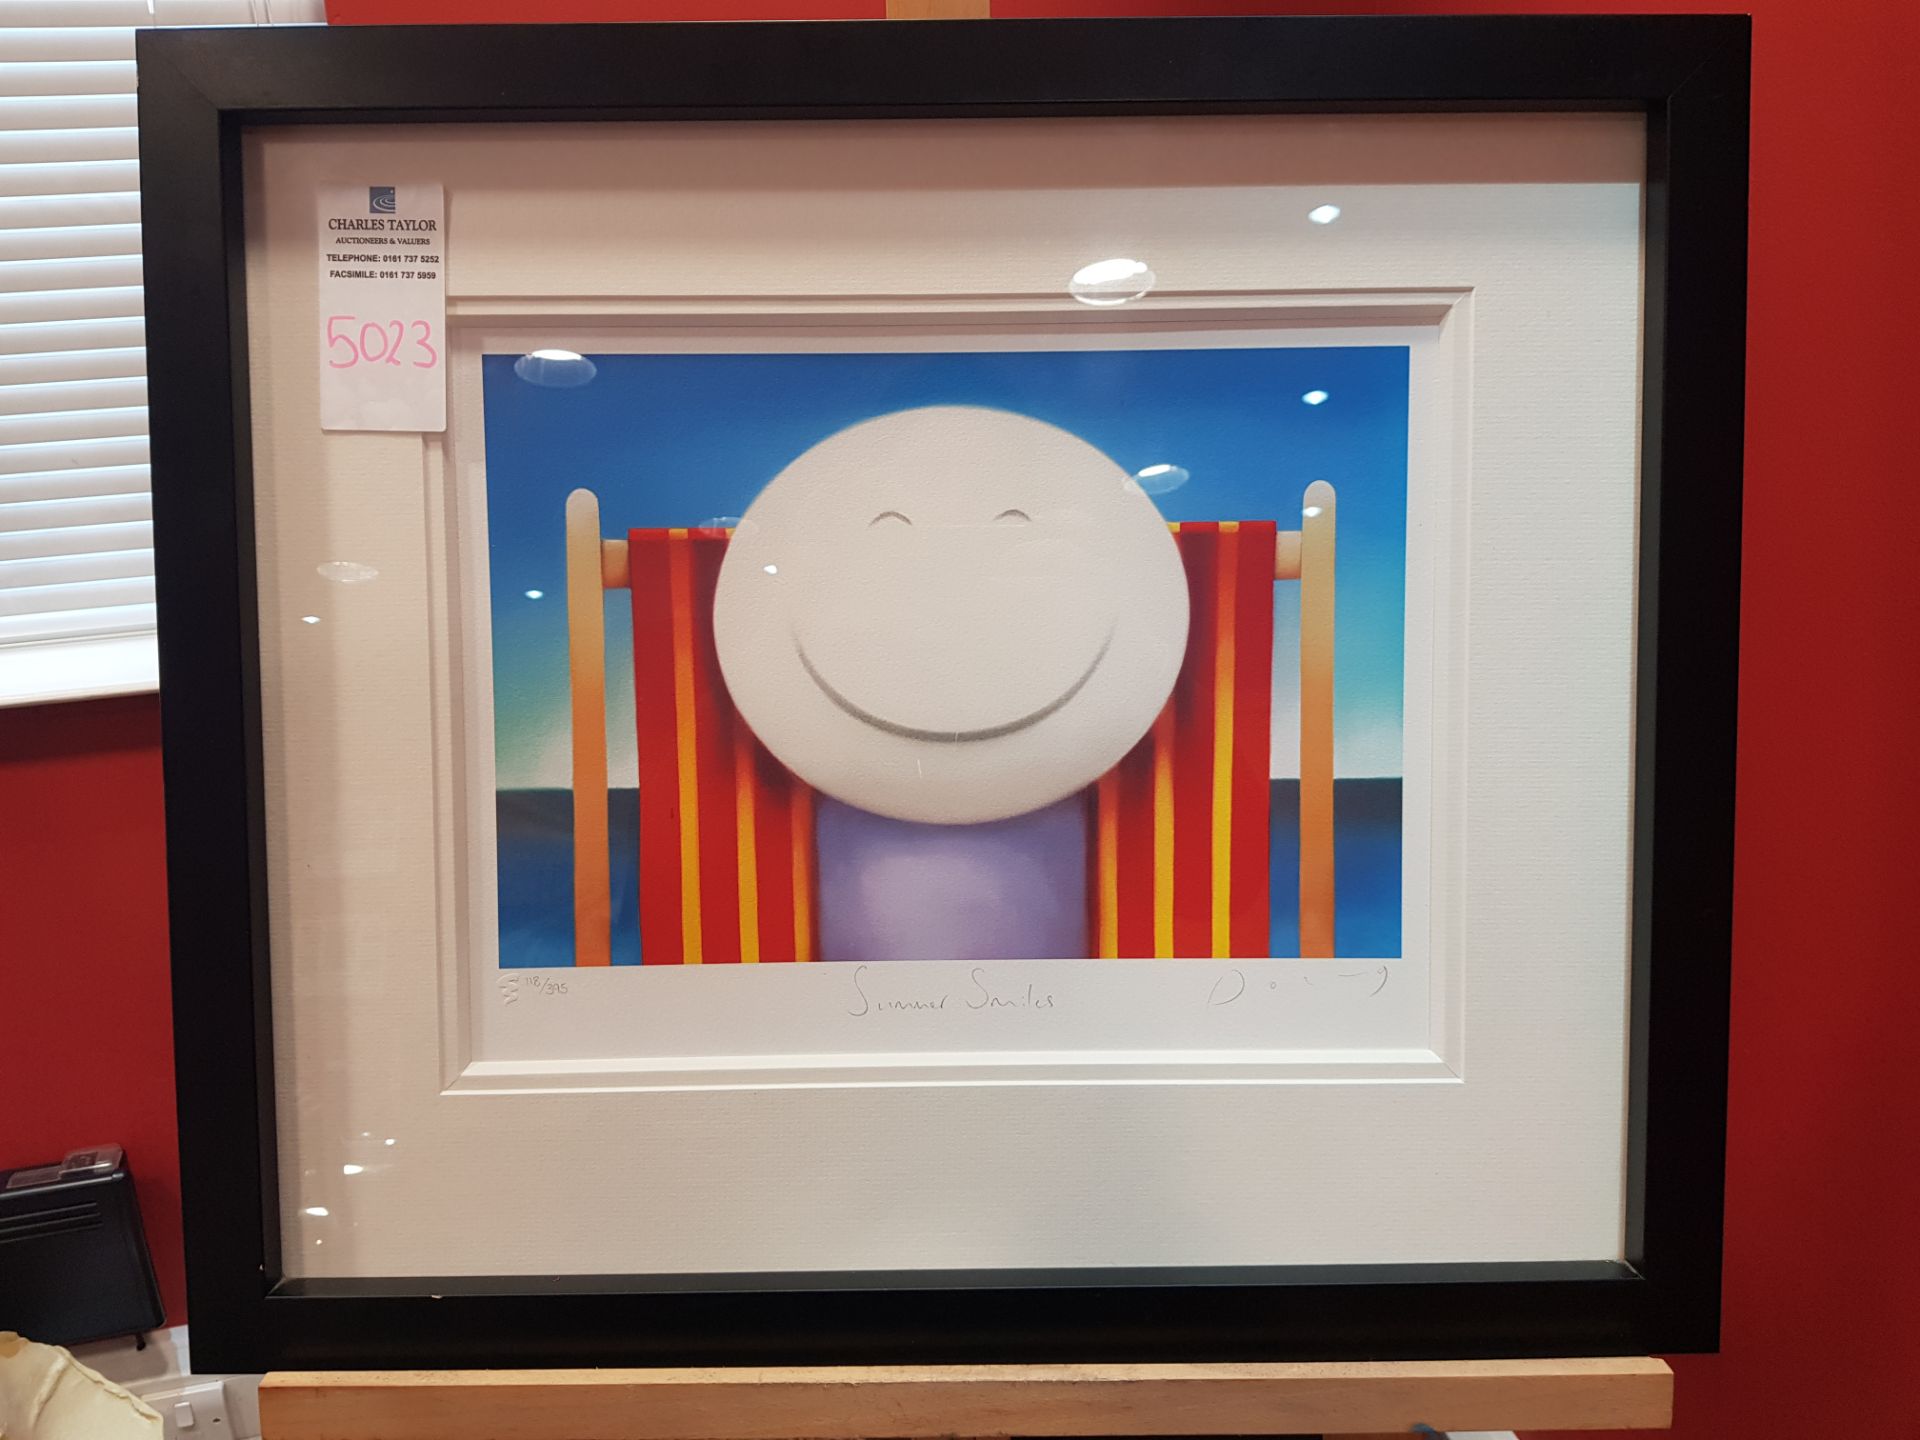 DOUG HYDE SUMMER SMILES LIMITED EDITION PHOTO LITHOGRAPH 63 X 53CM - EDITION SIZE 118/395 RRP £325